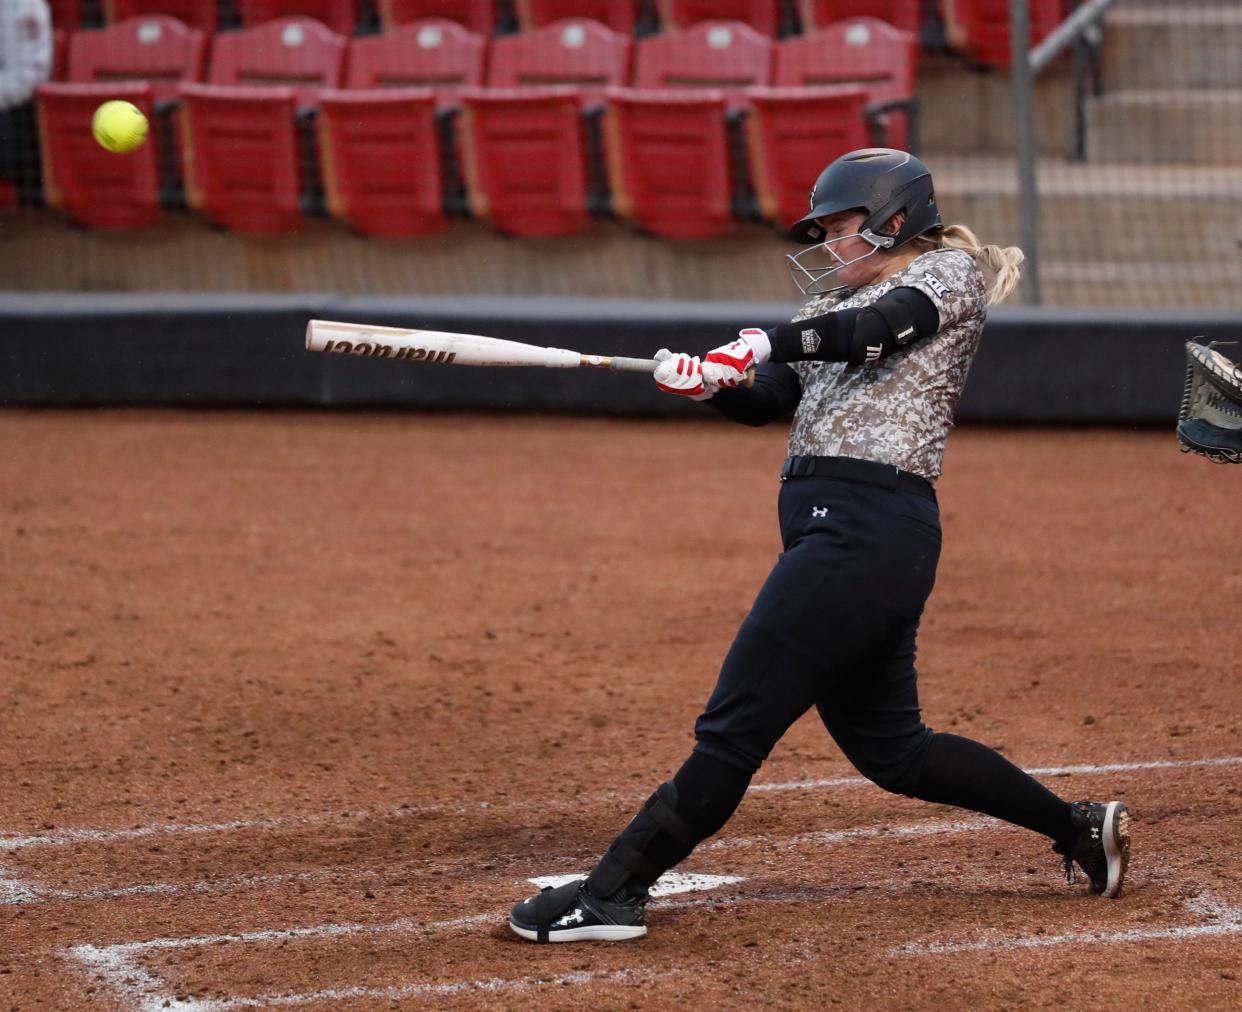 Texas Tech first baseman Ellie Bailey leads the Big 12 in home runs with 11 and is tied for second in runs batted in with 34. Tech opens Big 12 play against No. 10 Texas on Friday, Saturday and Sunday in Austin.